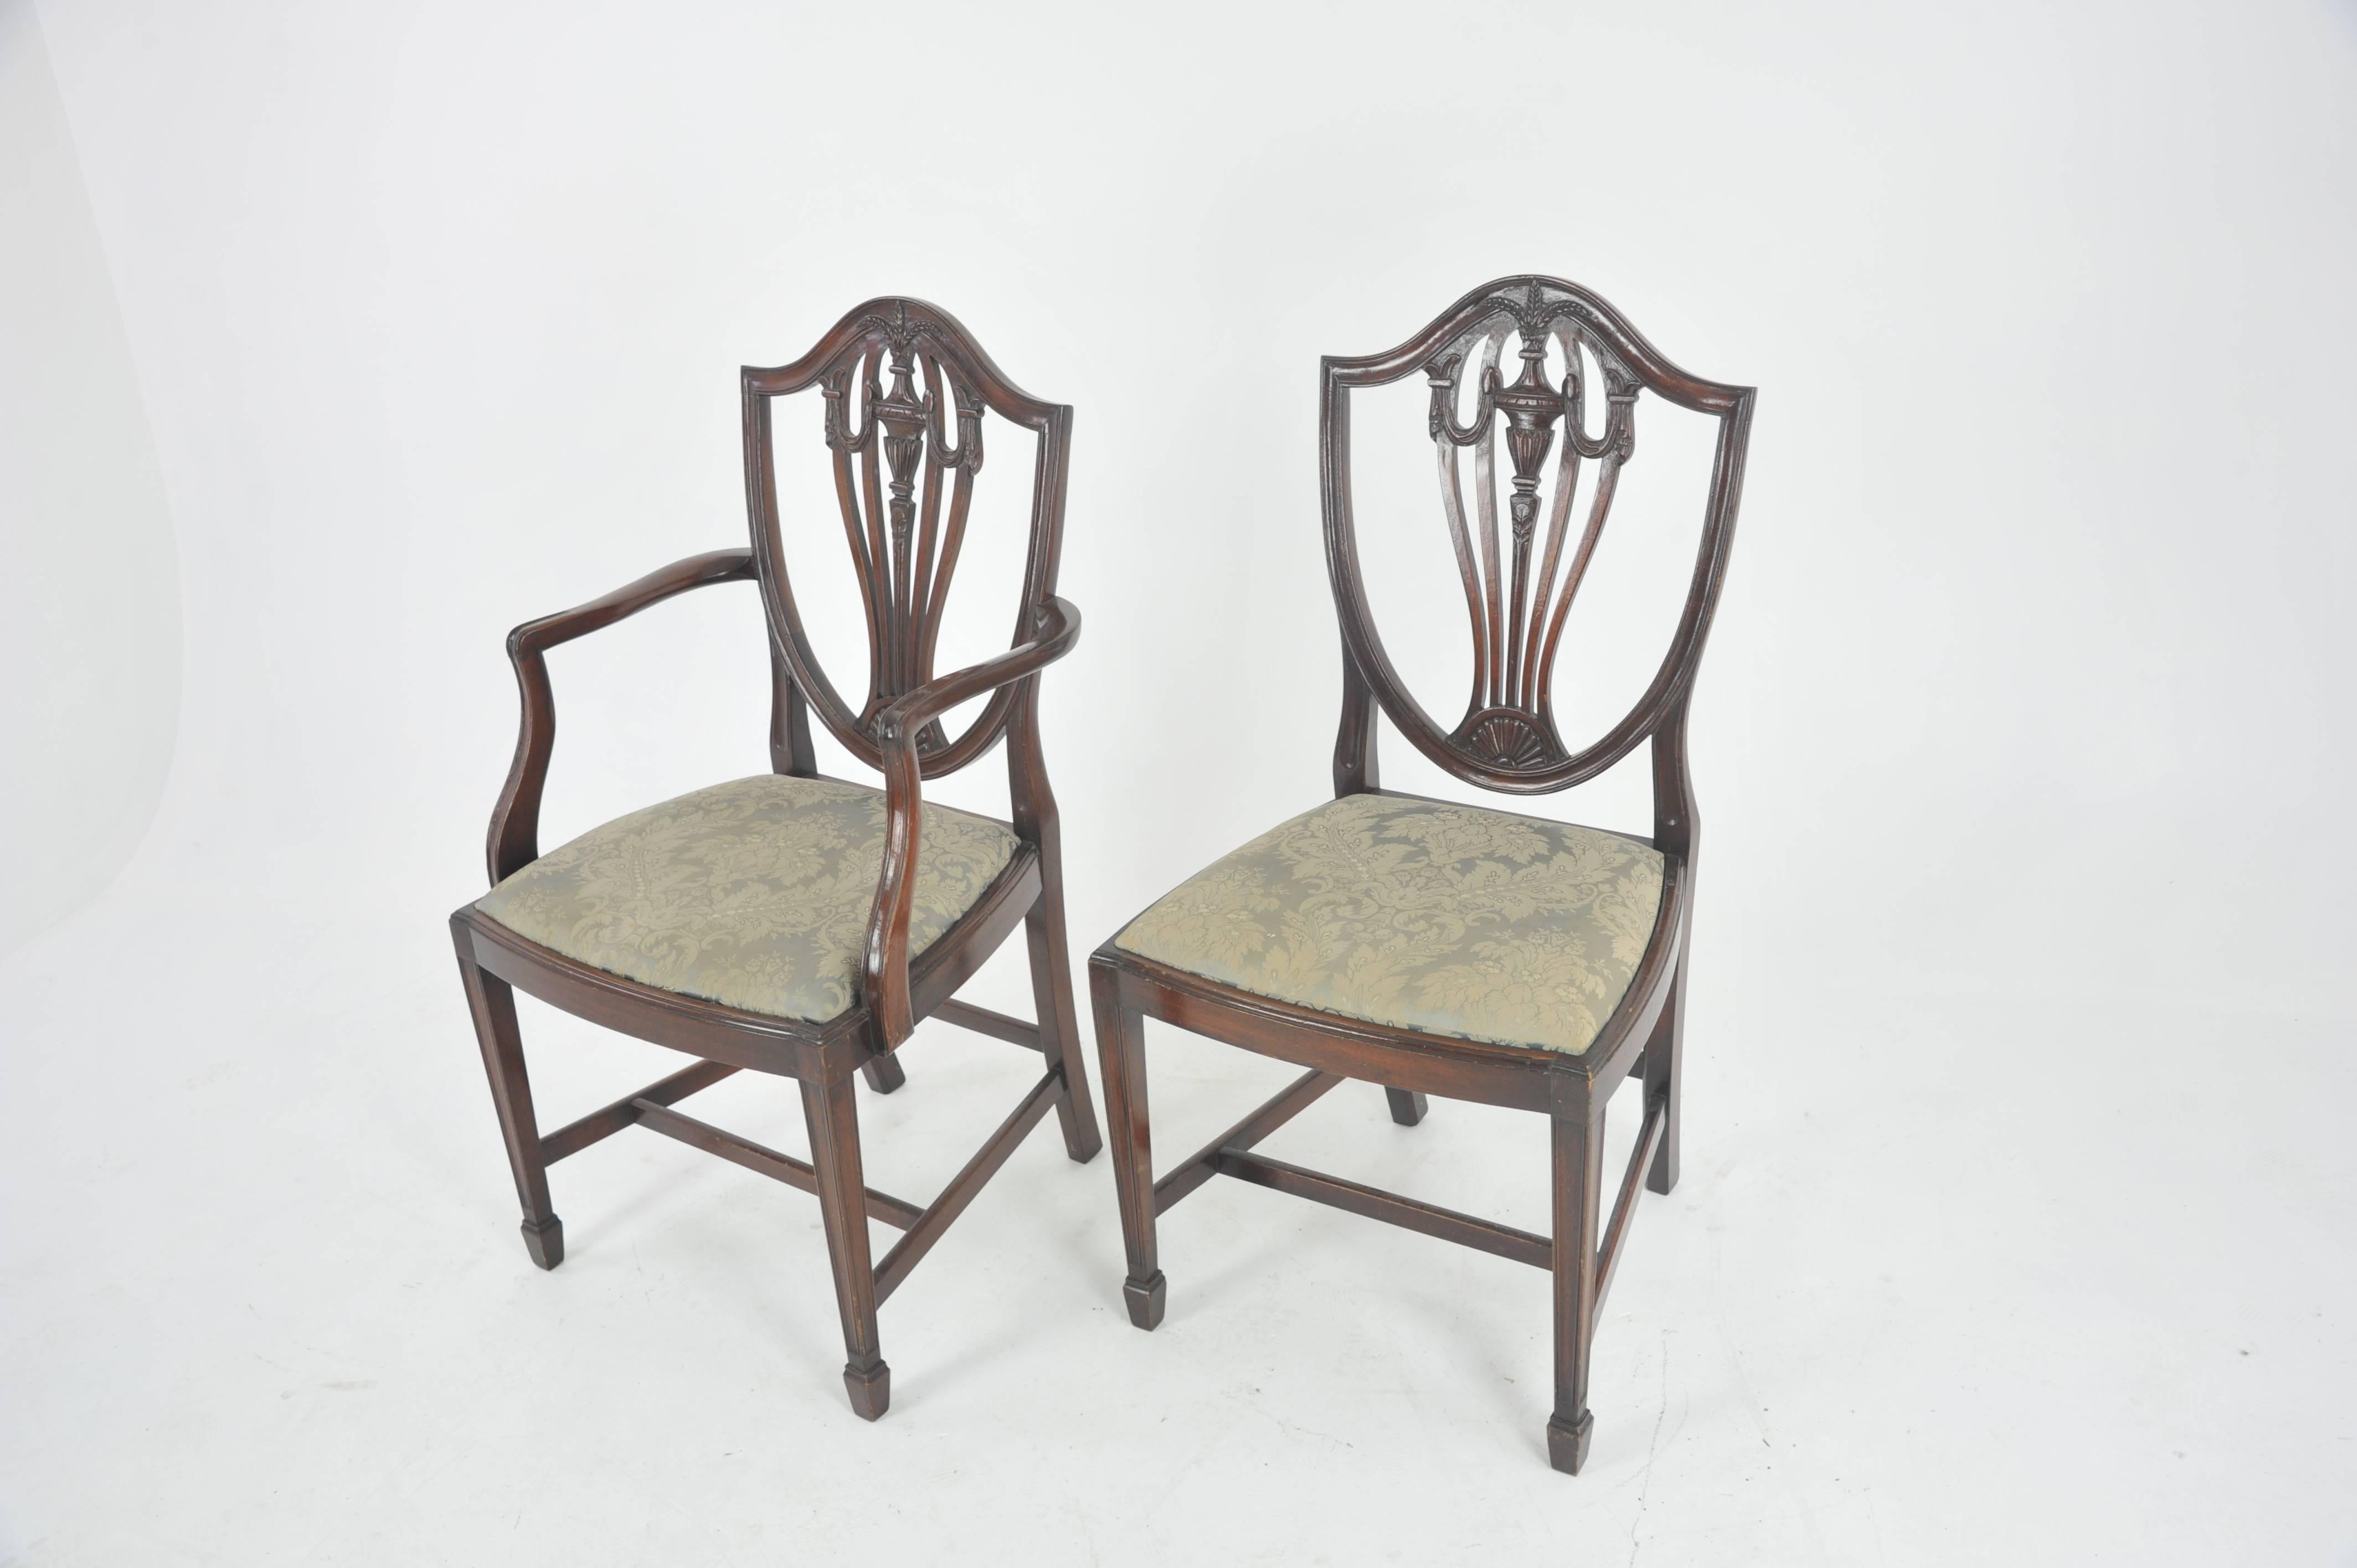 10 Dining Chairs, Antique Dining Chairs, Hepplewhite, Mahogany, B1071 REDUCED!!! 4